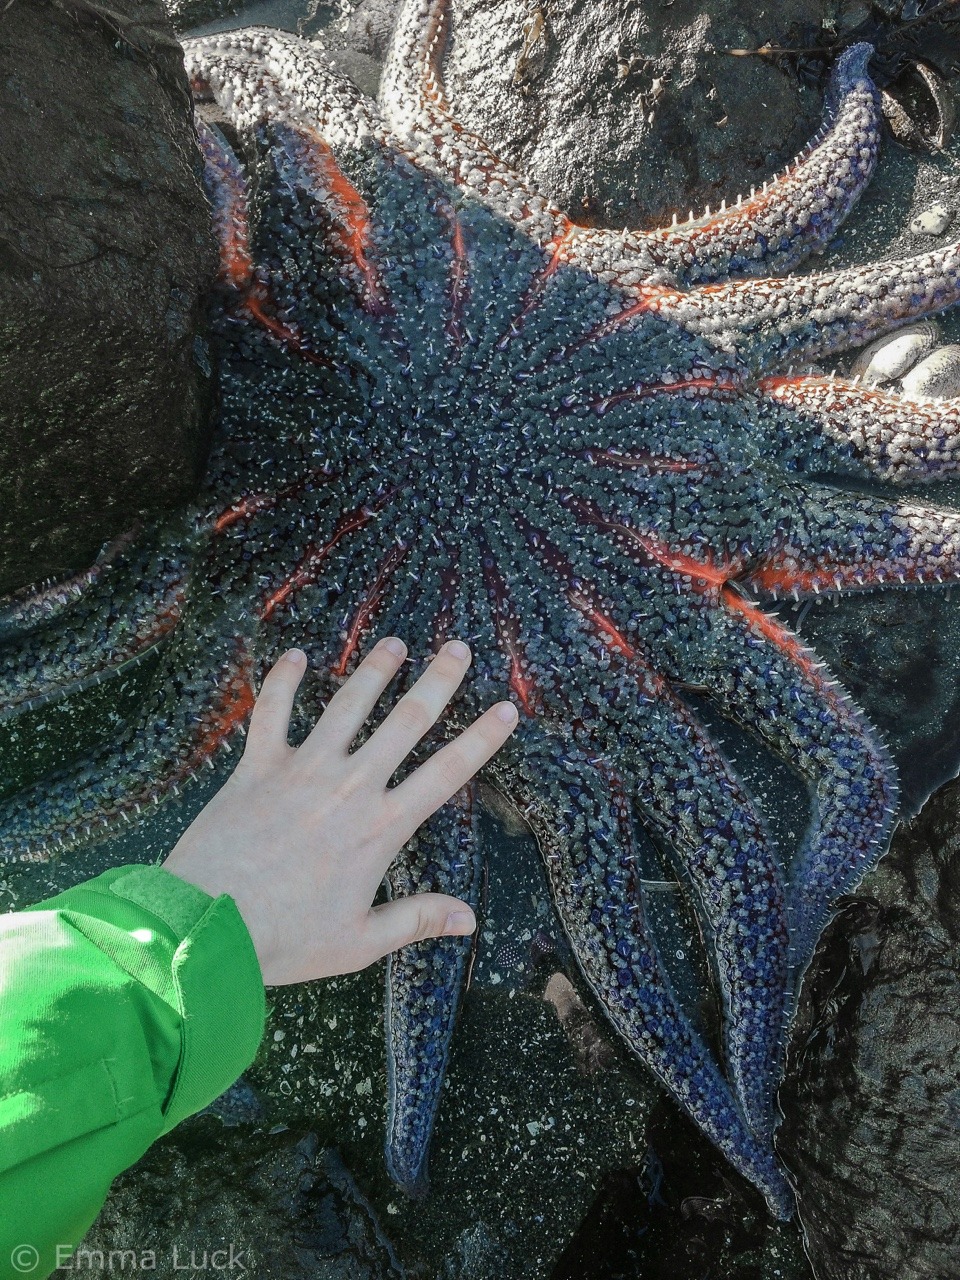 flukeprintphotography:
“ Here’s something a little less mammal-y: Pycnopodia helianthoides, aka the sunflower sea star!
These big fellas are one of the largest species of sea star in the world. They can reach 3.3 feet across and weigh up to 11...